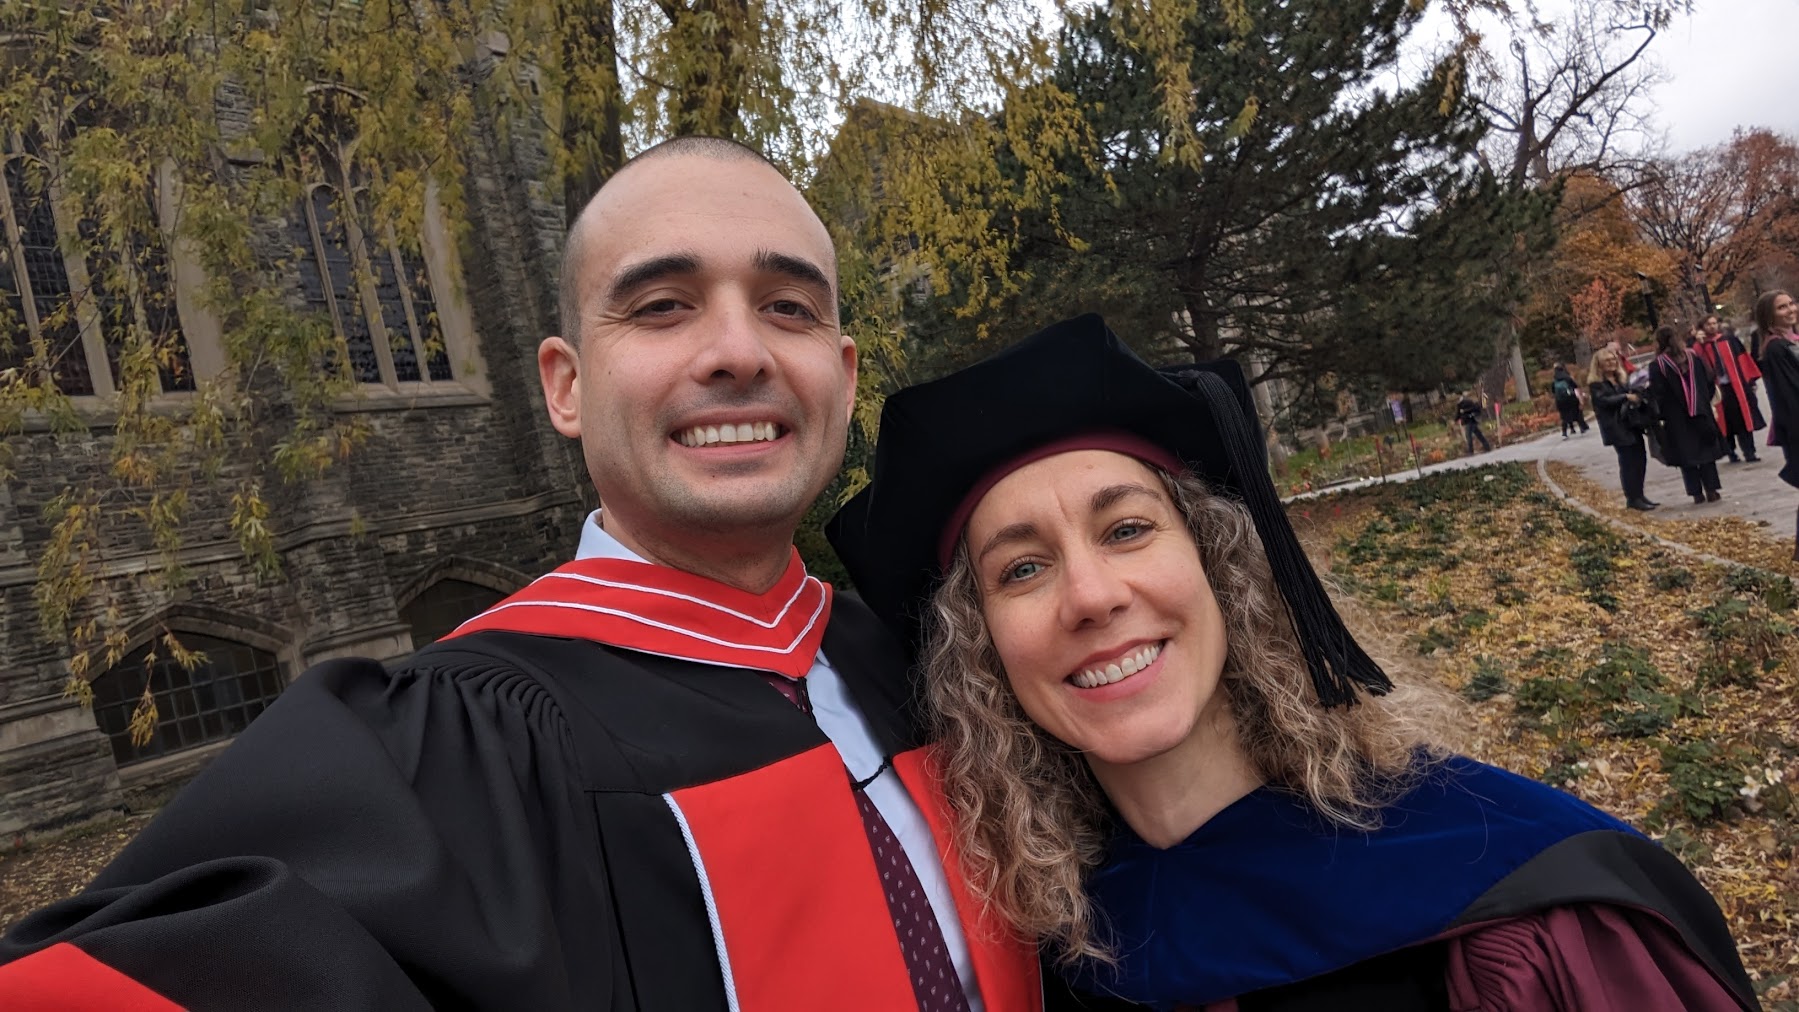 Dr. Giancarlo Fiorella and Professor Beatrice Jauregui in their convocation robes